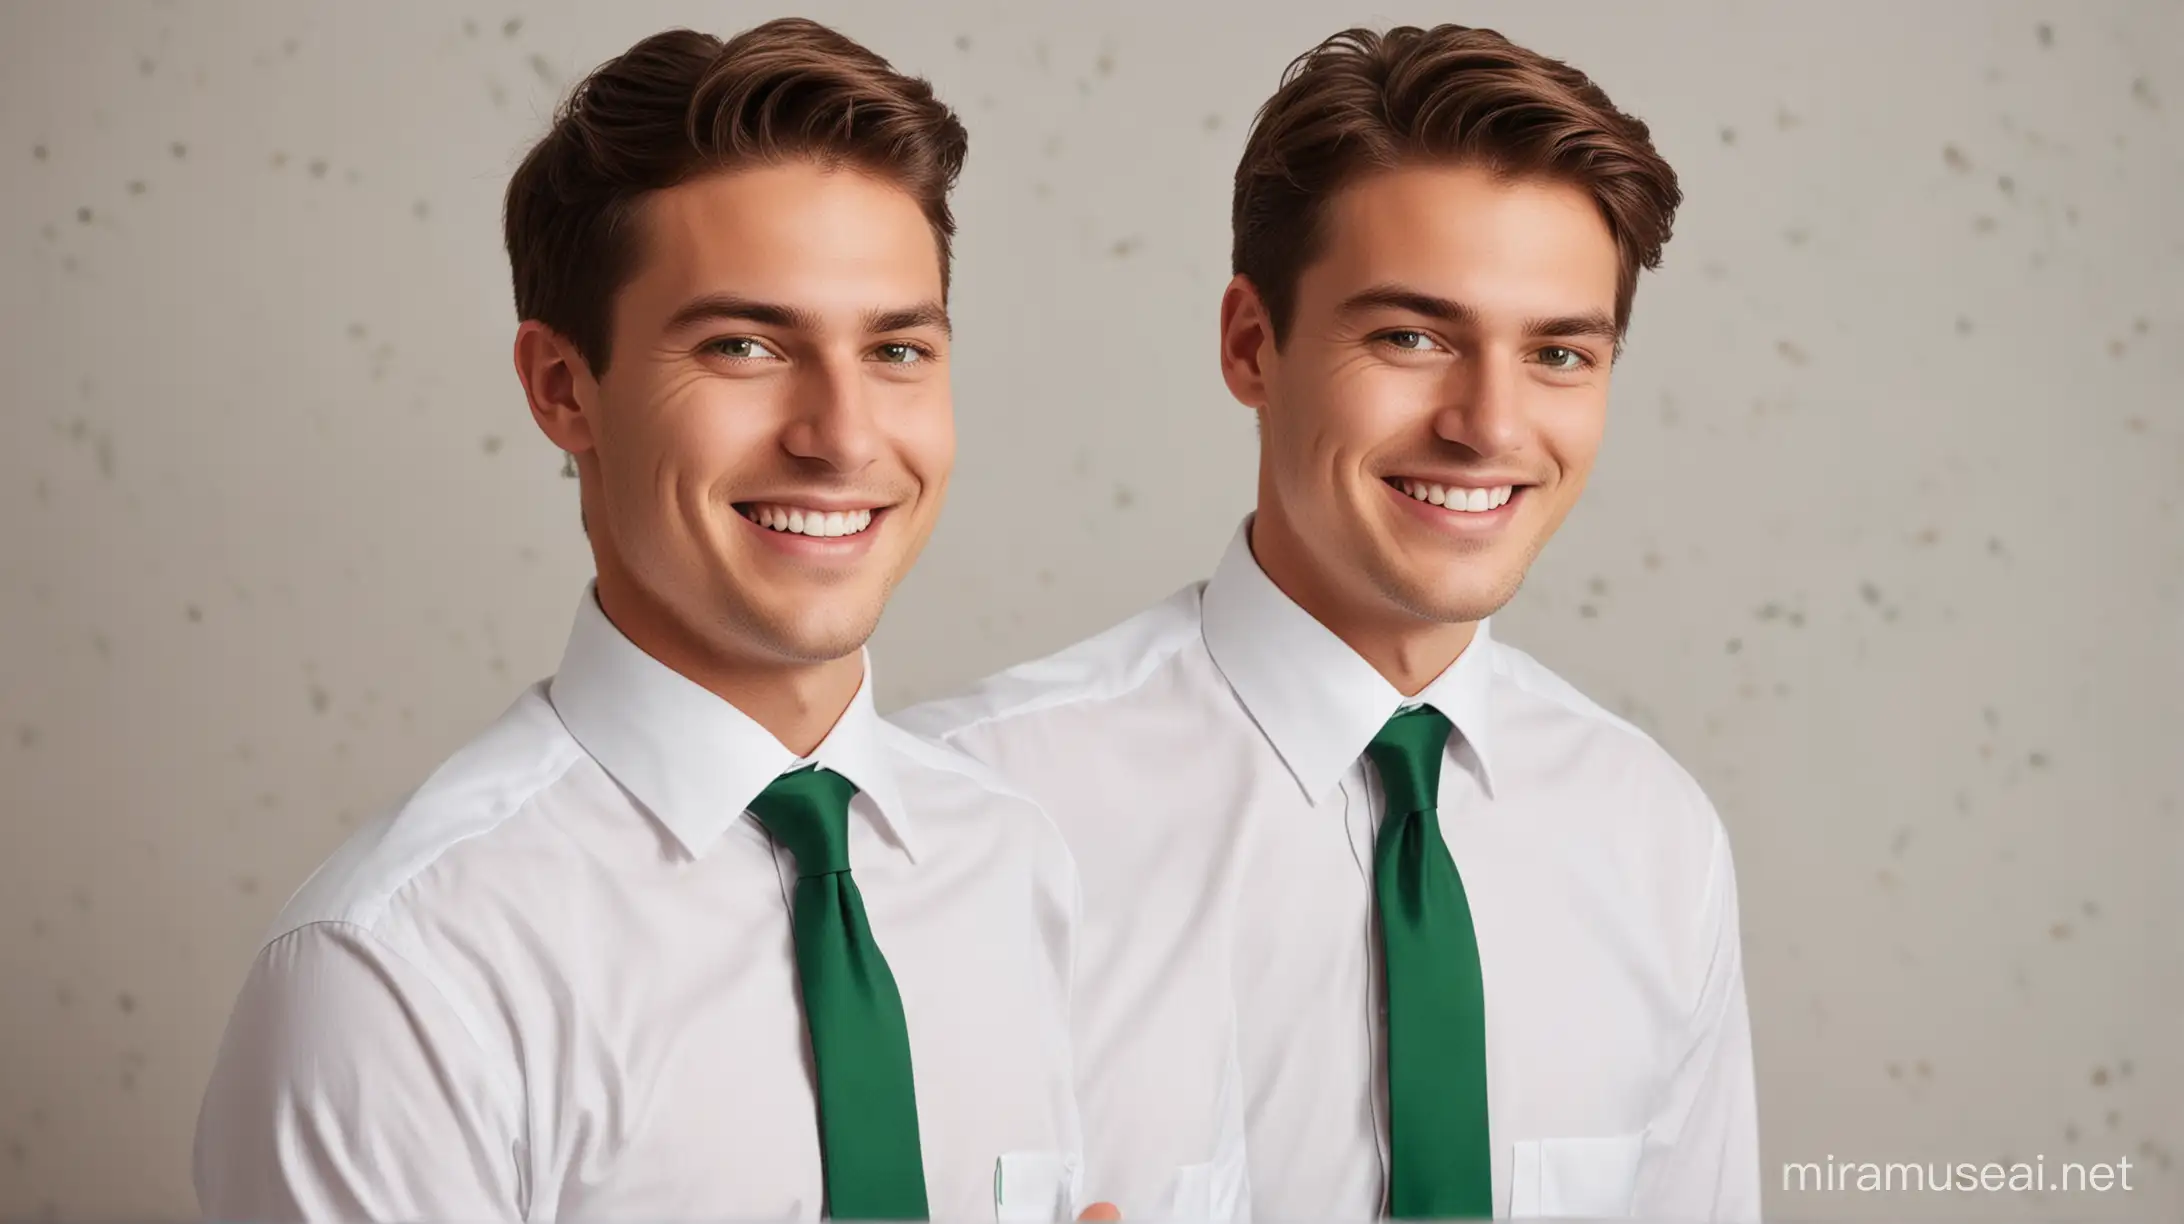 Affectionate Gesture Smiling Men in White Shirts with Green Ties Exchange Shoulder Massage